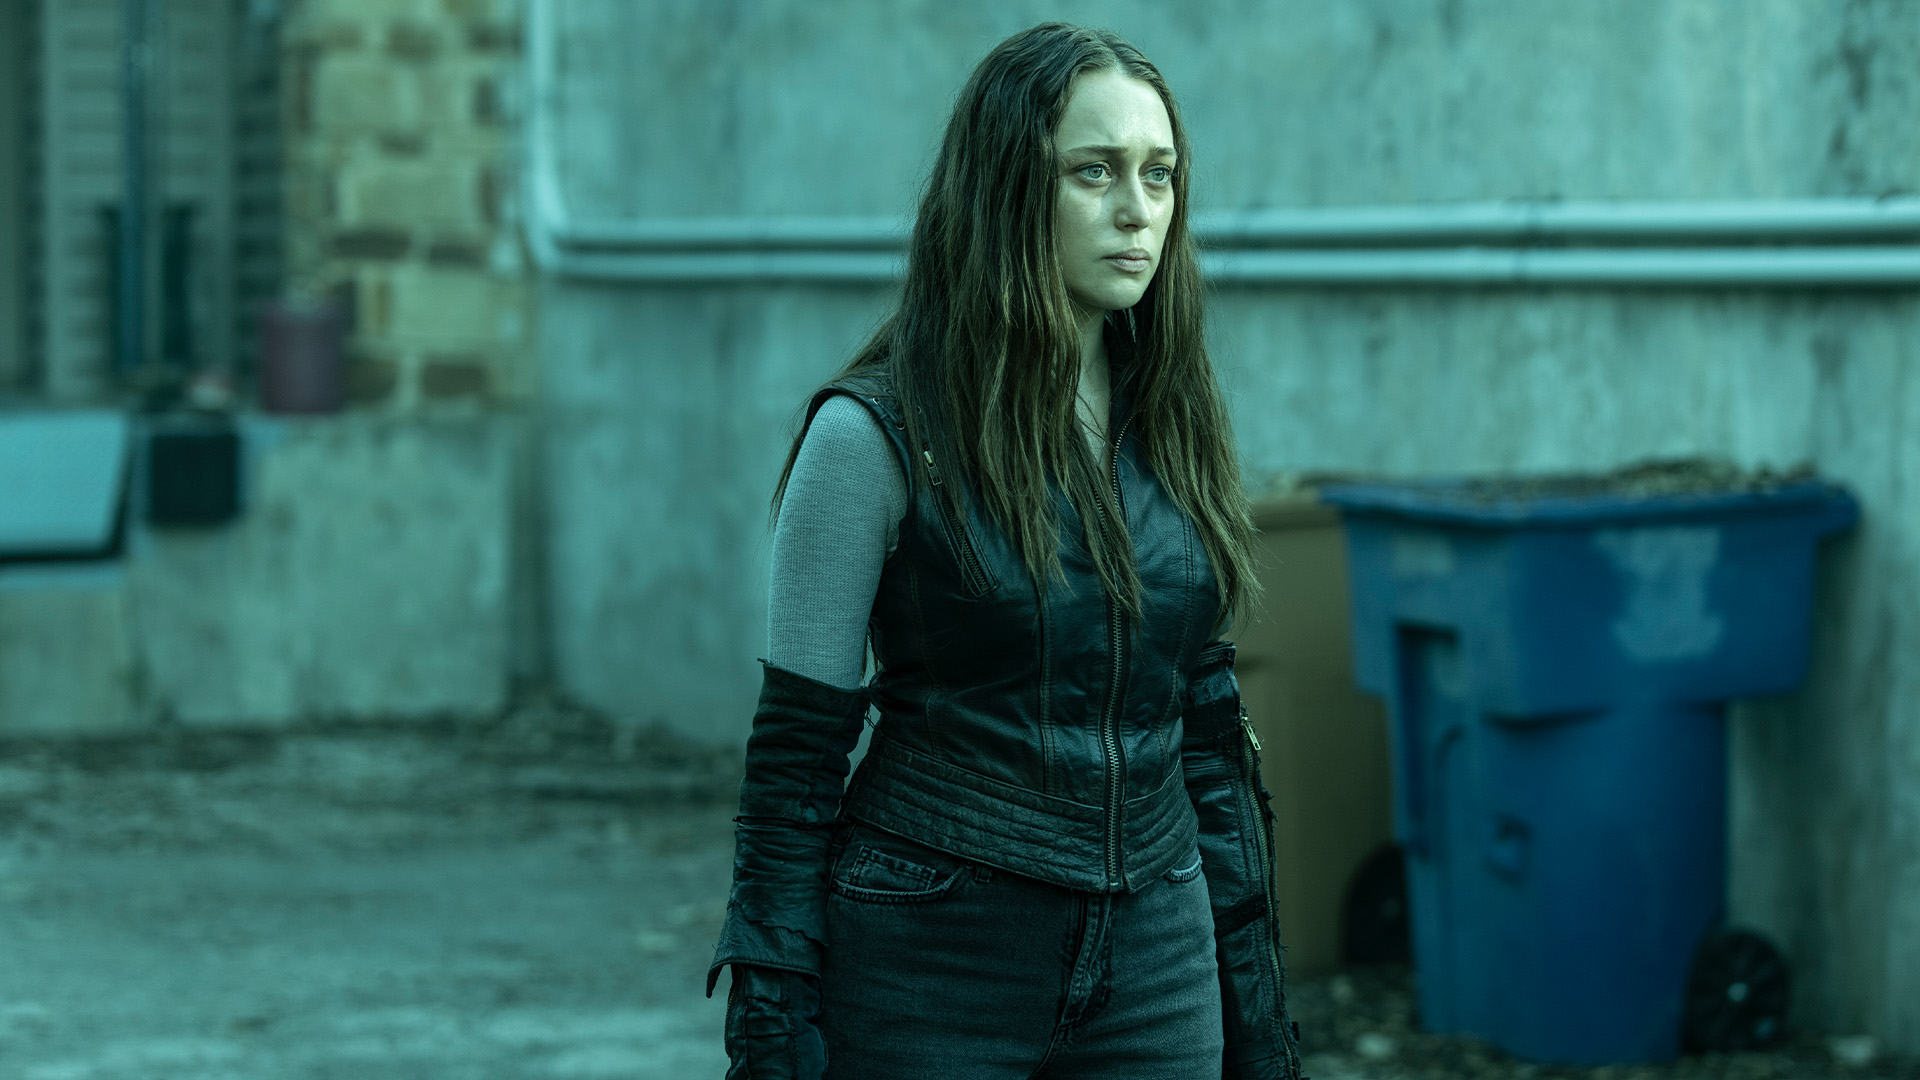 Follow Me, Alicia fights her fevers while on the run from Arno., TV-MA, Season 1033571, Episode 9